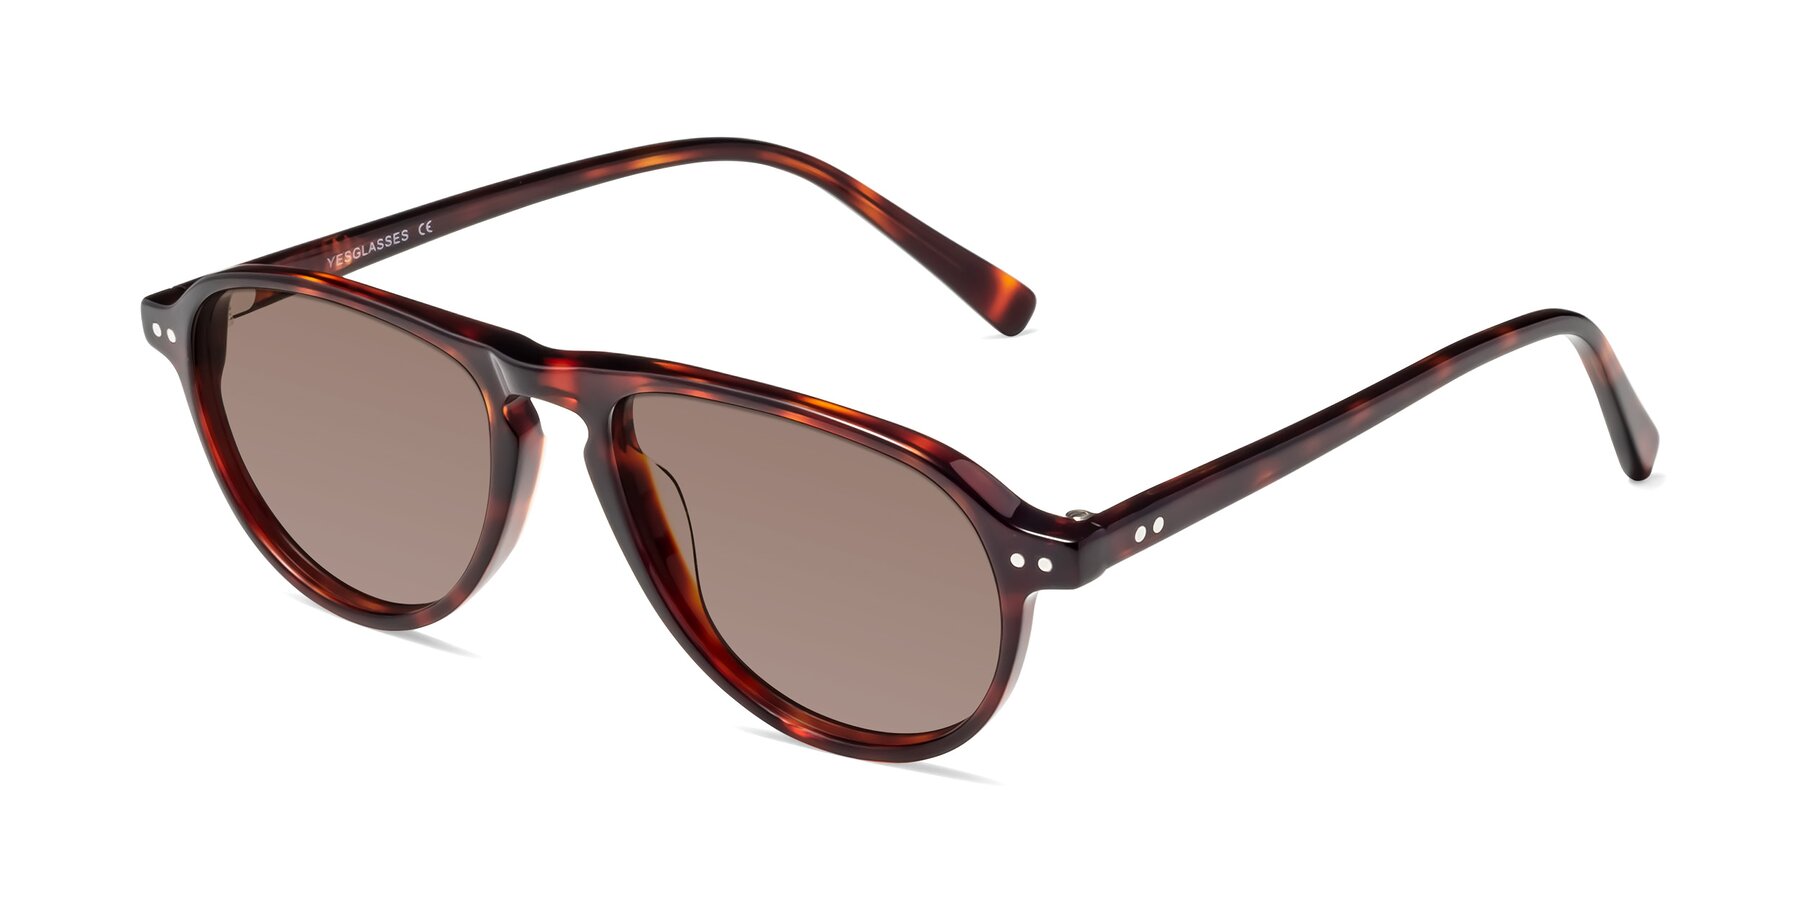 Angle of 17544 in Burgundy Tortoise with Medium Brown Tinted Lenses